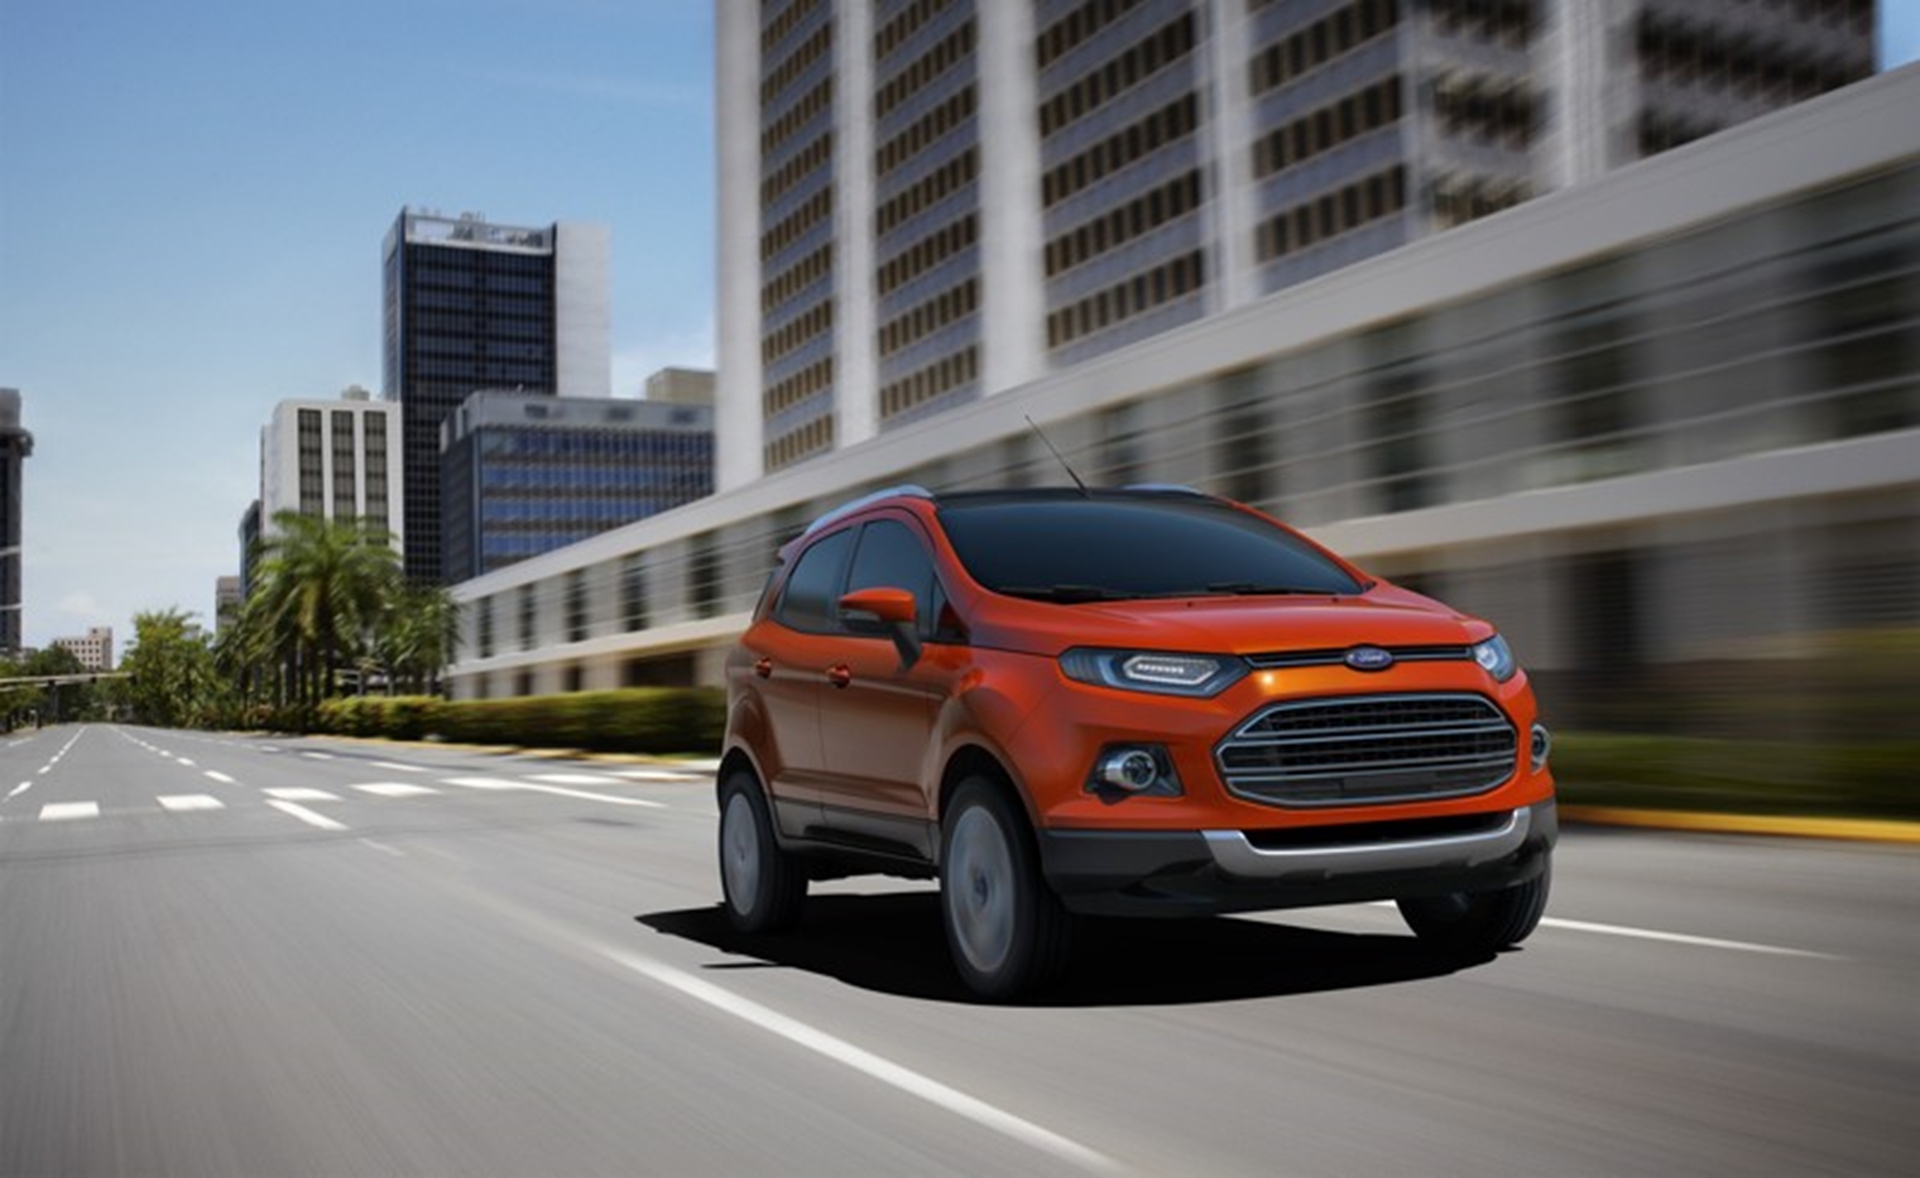 Delhi Auto Expo: Ford Previews All-New EcoSport at New Delhi Auto Expo As New Product Momentum in Asia Continues to Build